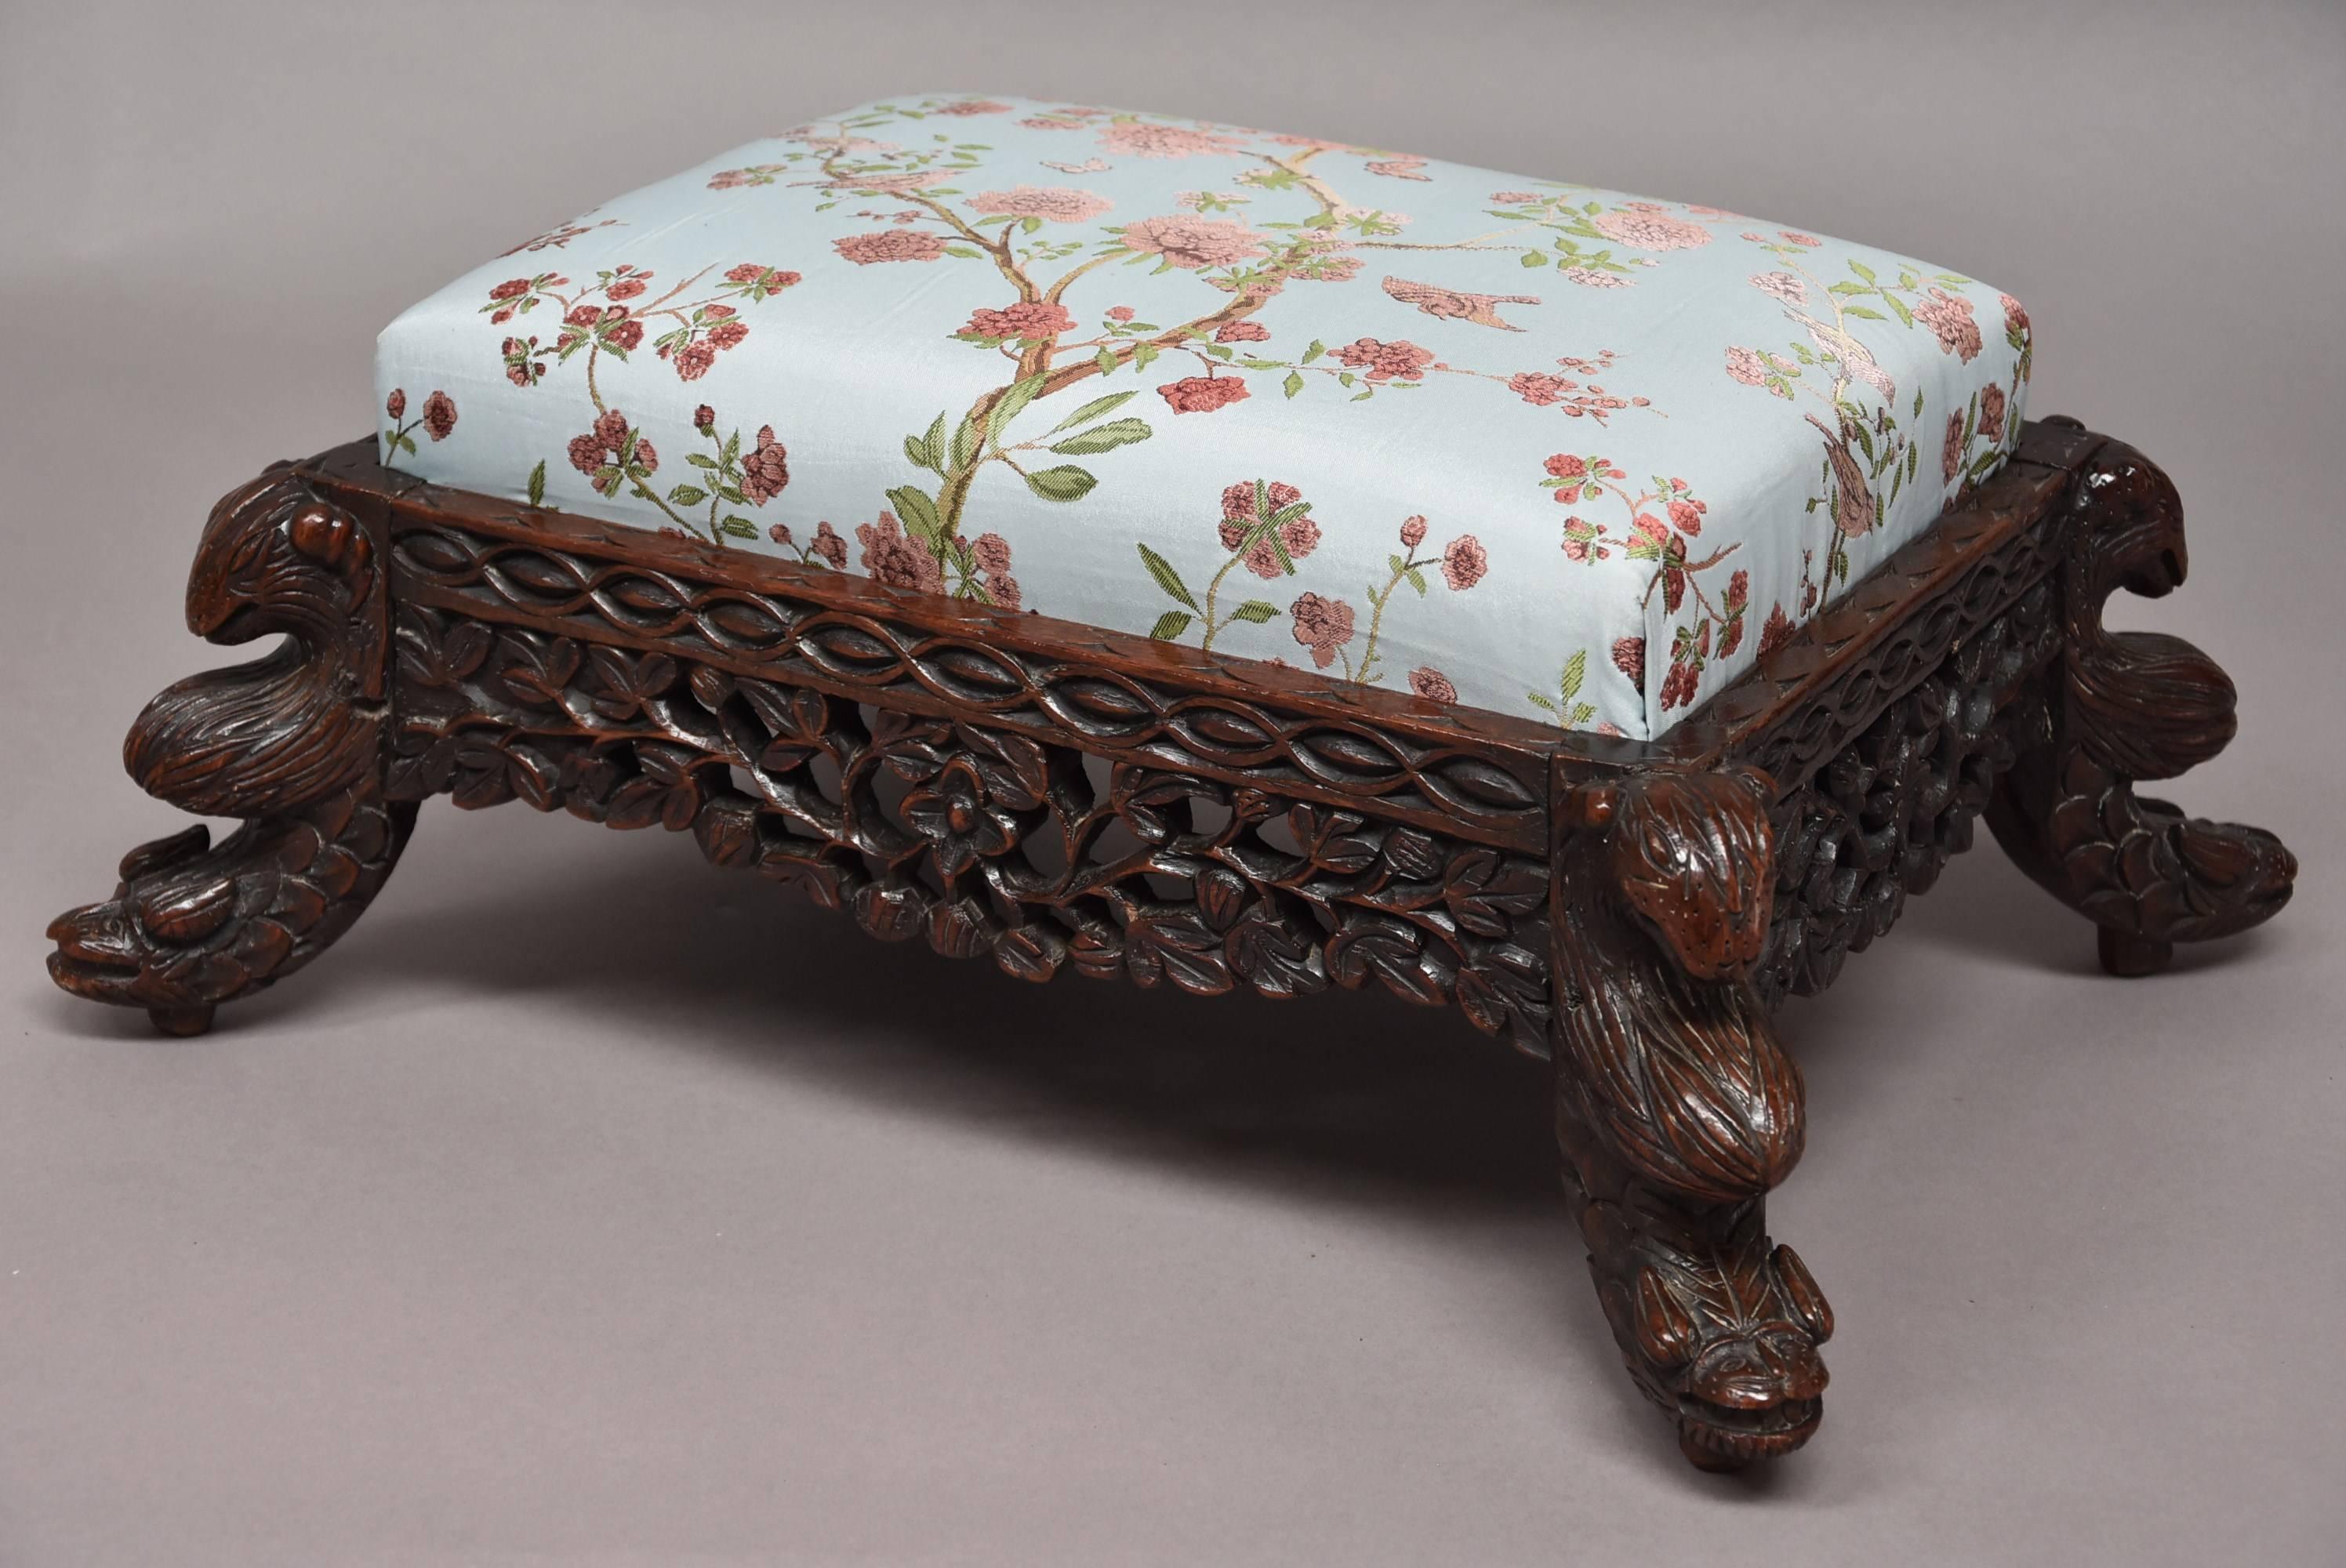 A decorative late 19th century hardwood Anglo-Indian footstool.

This stool consists of a drop in cushion to the top covered in a silk fabric (this can easily be reupholstered if necessary once purchased).

The stool consists of a mythical